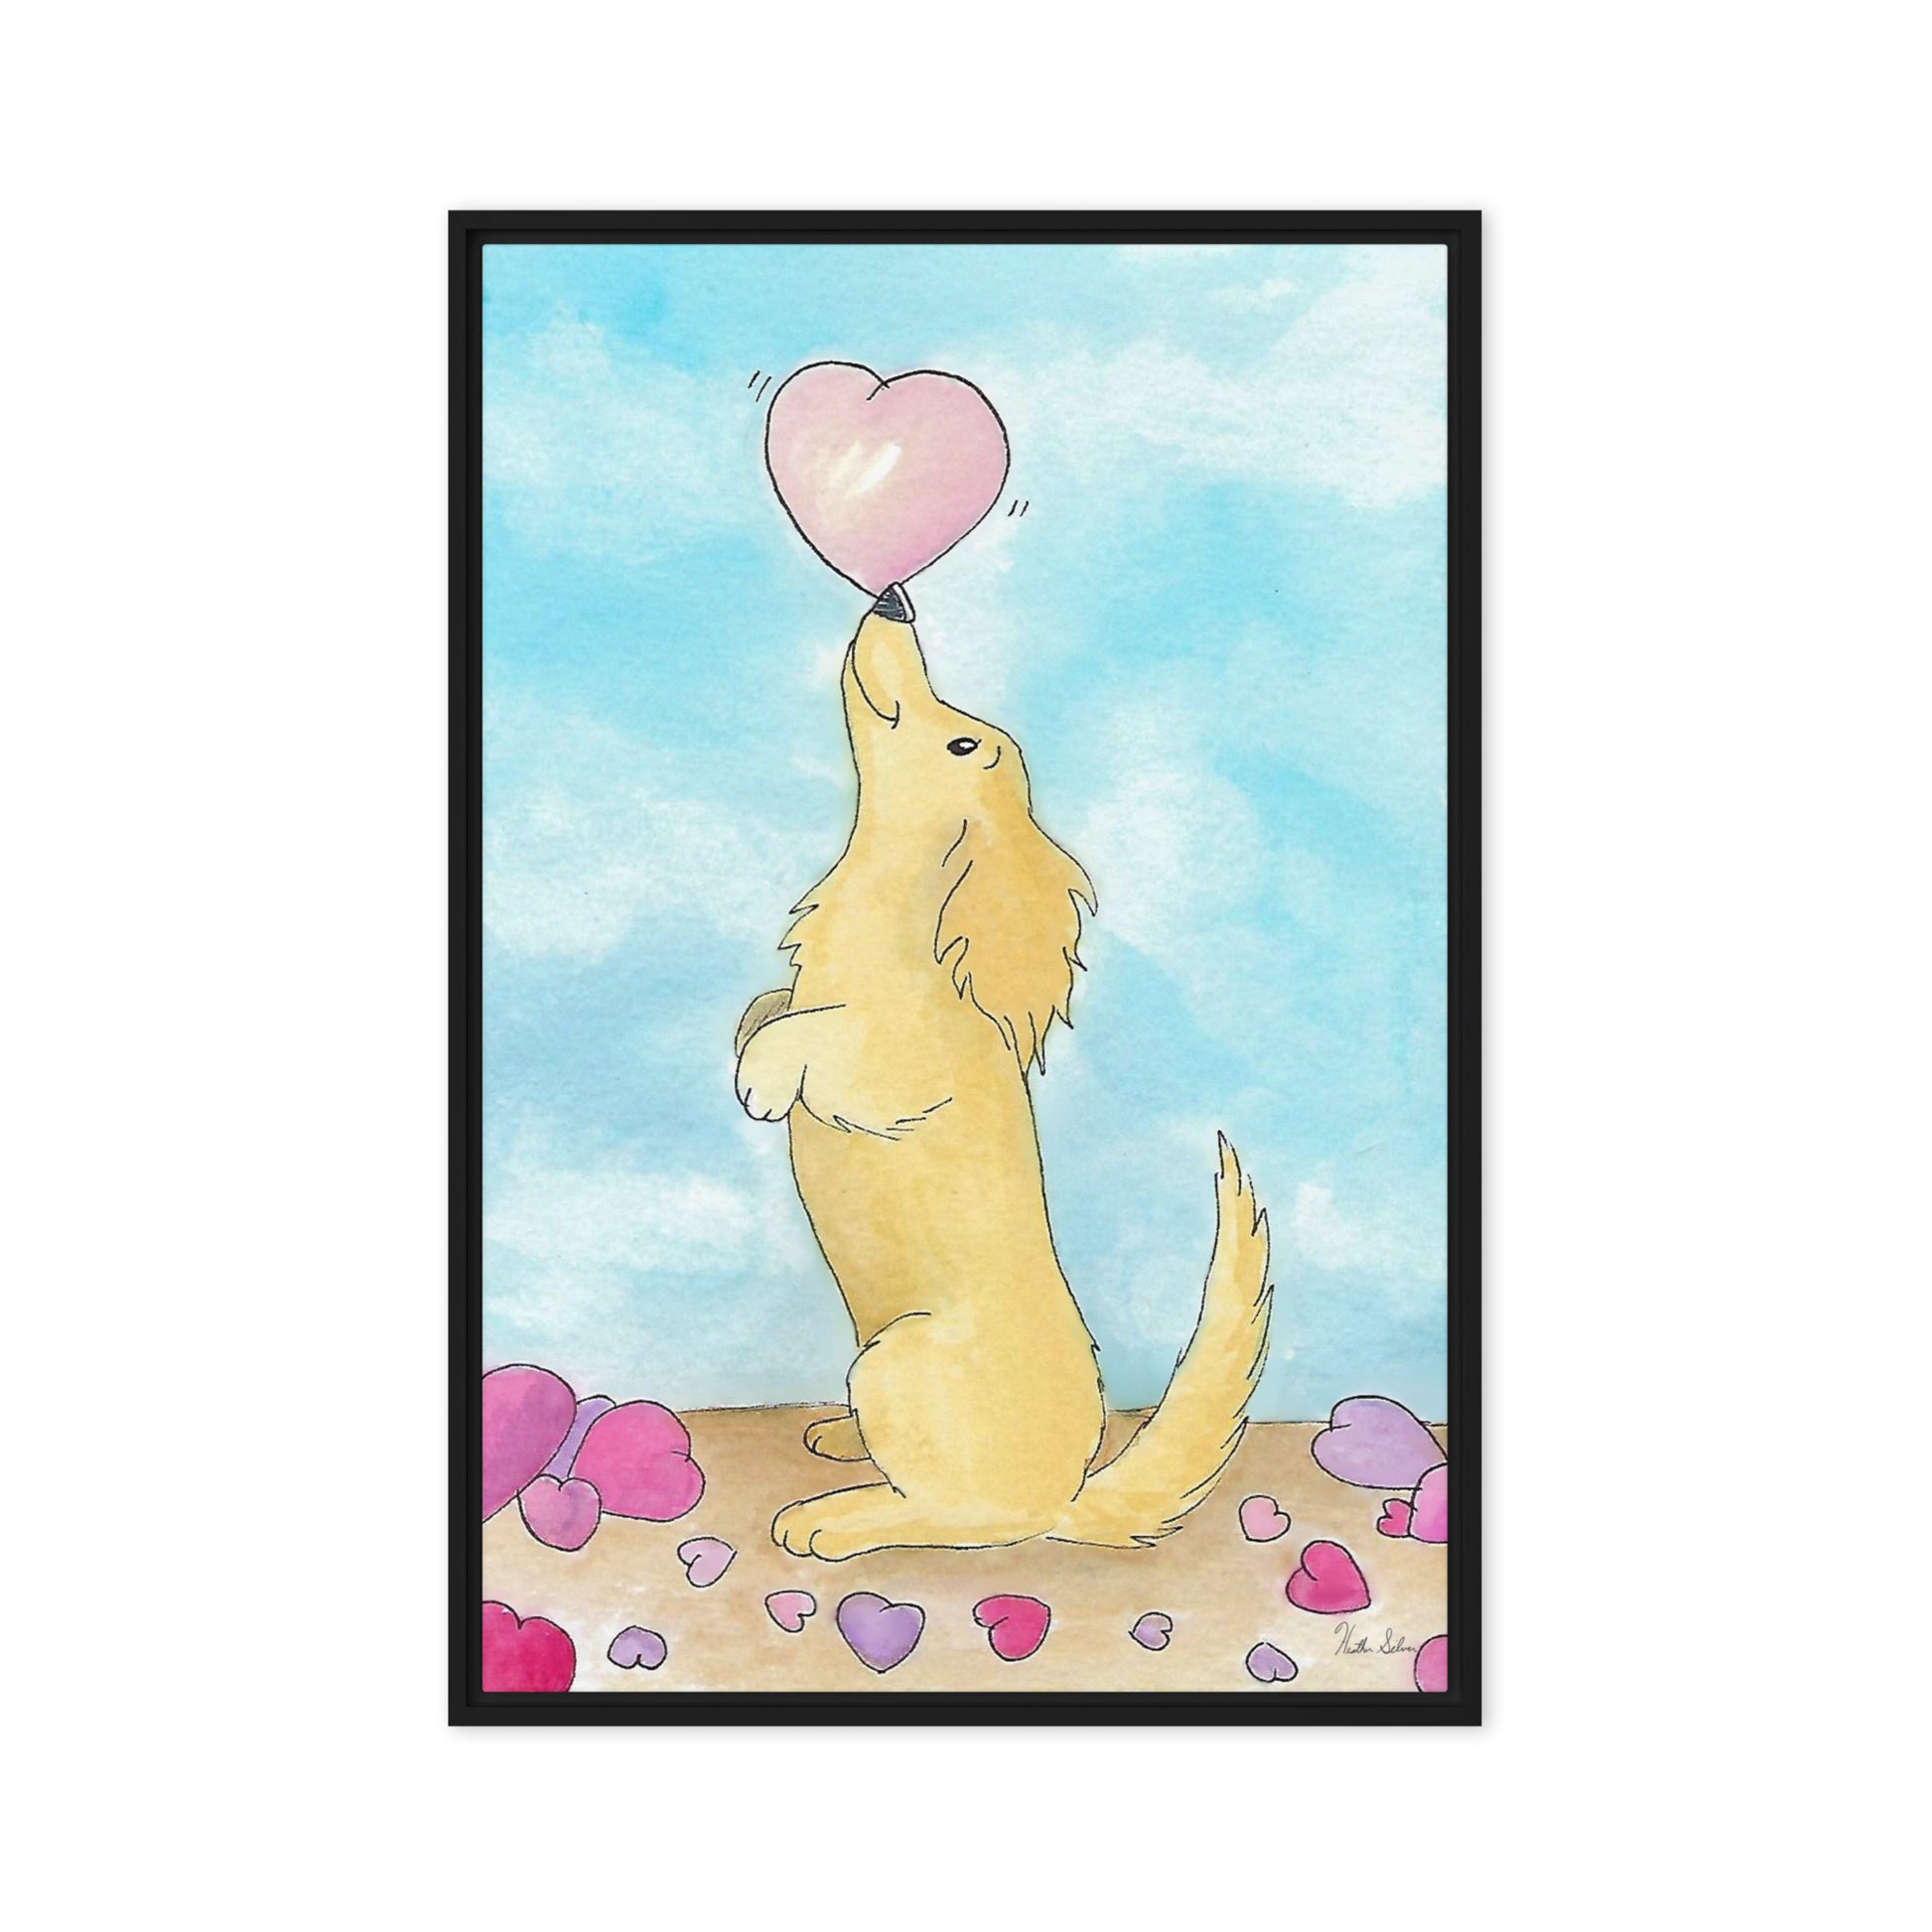 24 by 36 inch framed canvas Puppy Love print. The canvas is in a black pine wood frame.